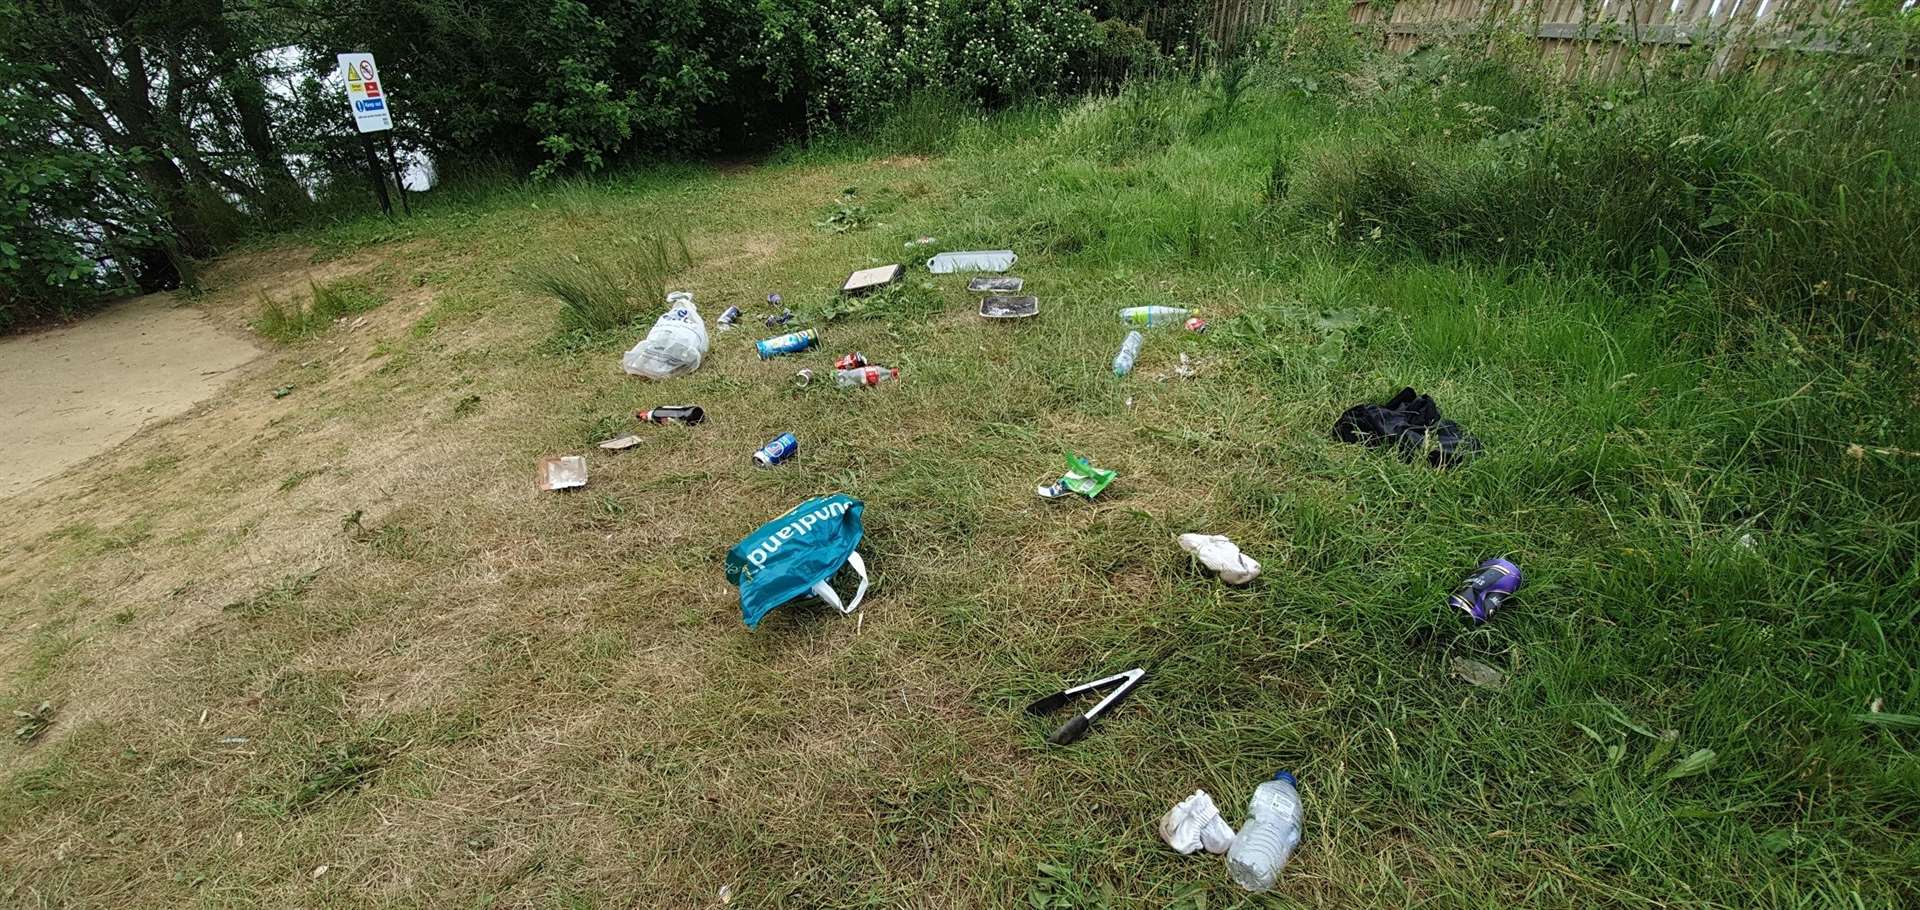 Rubbish strewn across the grass at Leybourne Lakes in Snodland. Picture: Tonbridge and Malling Borough Council